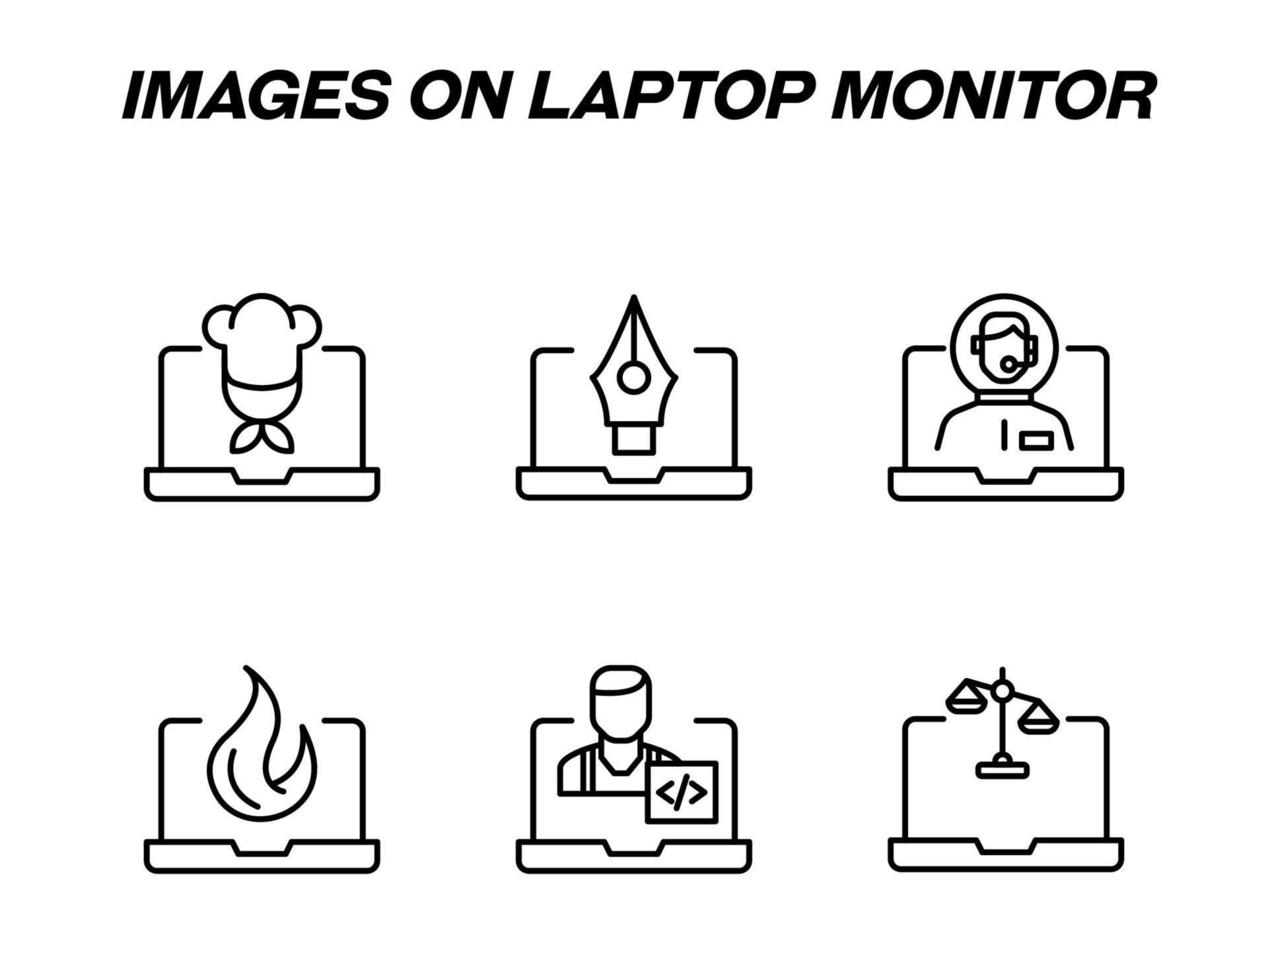 Items on laptop monitor pack. Modern vector monochrome signs. Line icon set with icons of chef, pen tool, astronaut, fire, programmer, scale